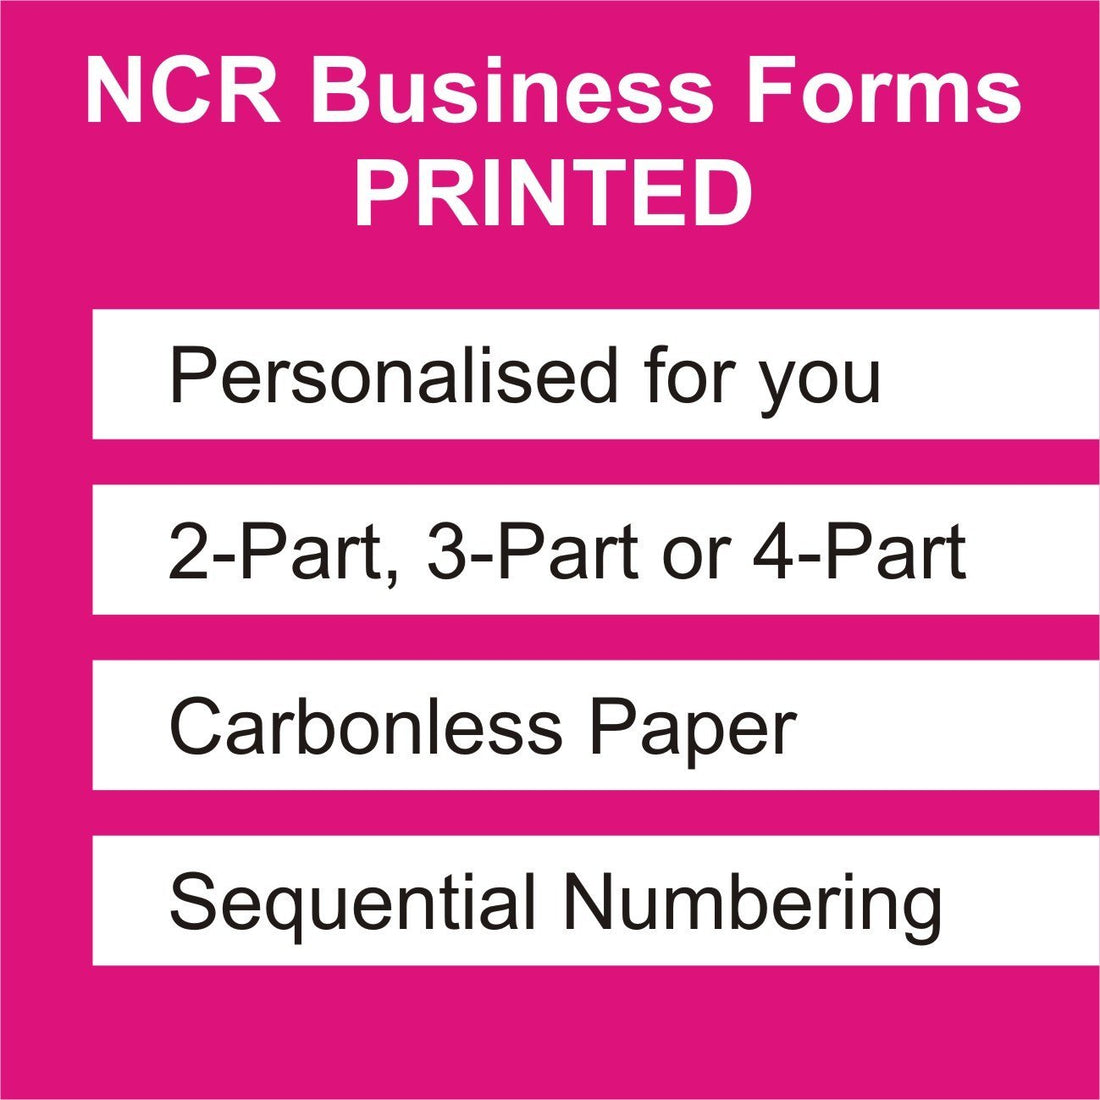 NCR Business Forms Printed - Personalised For You!